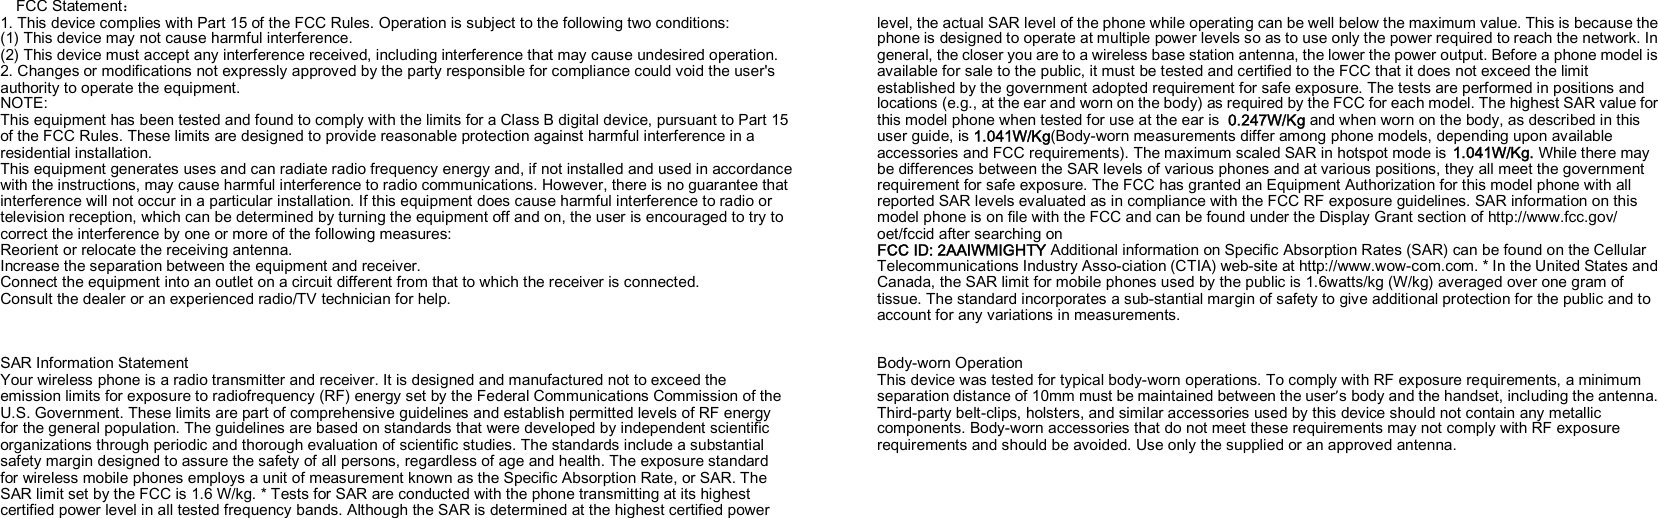         FCC Statement： 1. This device complies with Part 15 of the FCC Rules. Operation is subject to the following two conditions: (1) This device may not cause harmful interference. (2) This device must accept any interference received, including interference that may cause undesired operation. 2. Changes or modifications not expressly approved by the party responsible for compliance could void the user&apos;s authority to operate the equipment. NOTE:   This equipment has been tested and found to comply with the limits for a Class B digital device, pursuant to Part 15 of the FCC Rules. These limits are designed to provide reasonable protection against harmful interference in a residential installation. This equipment generates uses and can radiate radio frequency energy and, if not installed and used in accordance with the instructions, may cause harmful interference to radio communications. However, there is no guarantee that interference will not occur in a particular installation. If this equipment does cause harmful interference to radio or television reception, which can be determined by turning the equipment off and on, the user is encouraged to try to correct the interference by one or more of the following measures: Reorient or relocate the receiving antenna. Increase the separation between the equipment and receiver. Connect the equipment into an outlet on a circuit different from that to which the receiver is connected.   Consult the dealer or an experienced radio/TV technician for help.    SAR Information Statement Your wireless phone is a radio transmitter and receiver. It is designed and manufactured not to exceed the emission limits for exposure to radiofrequency (RF) energy set by the Federal Communications Commission of the U.S. Government. These limits are part of comprehensive guidelines and establish permitted levels of RF energy for the general population. The guidelines are based on standards that were developed by independent scientific organizations through periodic and thorough evaluation of scientific studies. The standards include a substantial safety margin designed to assure the safety of all persons, regardless of age and health. The exposure standard for wireless mobile phones employs a unit of measurement known as the Specific Absorption Rate, or SAR. The SAR limit set by the FCC is 1.6 W/kg. * Tests for SAR are conducted with the phone transmitting at its highest certified power level in all tested frequency bands. Although the SAR is determined at the highest certified power        level, the actual SAR level of the phone while operating can be well below the maximum value. This is because the phone is designed to operate at multiple power levels so as to use only the power required to reach the network. In general, the closer you are to a wireless base station antenna, the lower the power output. Before a phone model is available for sale to the public, it must be tested and certified to the FCC that it does not exceed the limit established by the government adopted requirement for safe exposure. The tests are performed in positions and locations (e.g., at the ear and worn on the body) as required by the FCC for each model. The highest SAR value for this model phone when tested for use at the ear is 0.247W/Kg and when worn on the body, as described in this user guide, is 1.041W/Kg(Body-worn measurements differ among phone models, depending upon available accessories and FCC requirements). The maximum scaled SAR in hotspot mode is 1.041W/Kg. While there may be differences between the SAR levels of various phones and at various positions, they all meet the government requirement for safe exposure. The FCC has granted an Equipment Authorization for this model phone with all reported SAR levels evaluated as in compliance with the FCC RF exposure guidelines. SAR information on this model phone is on file with the FCC and can be found under the Display Grant section of http://www.fcc.gov/ oet/fccid after searching on   FCC ID: 2AAIWMIGHTY Additional information on Specific Absorption Rates (SAR) can be found on the Cellular Telecommunications Industry Asso-ciation (CTIA) web-site at http://www.wow-com.com. * In the United States and Canada, the SAR limit for mobile phones used by the public is 1.6watts/kg (W/kg) averaged over one gram of tissue. The standard incorporates a sub-stantial margin of safety to give additional protection for the public and to account for any variations in measurements.   Body-worn Operation This device was tested for typical body-worn operations. To comply with RF exposure requirements, a minimum separation distance of 10mm must be maintained between the user’s body and the handset, including the antenna. Third-party belt-clips, holsters, and similar accessories used by this device should not contain any metallic components. Body-worn accessories that do not meet these requirements may not comply with RF exposure requirements and should be avoided. Use only the supplied or an approved antenna.   